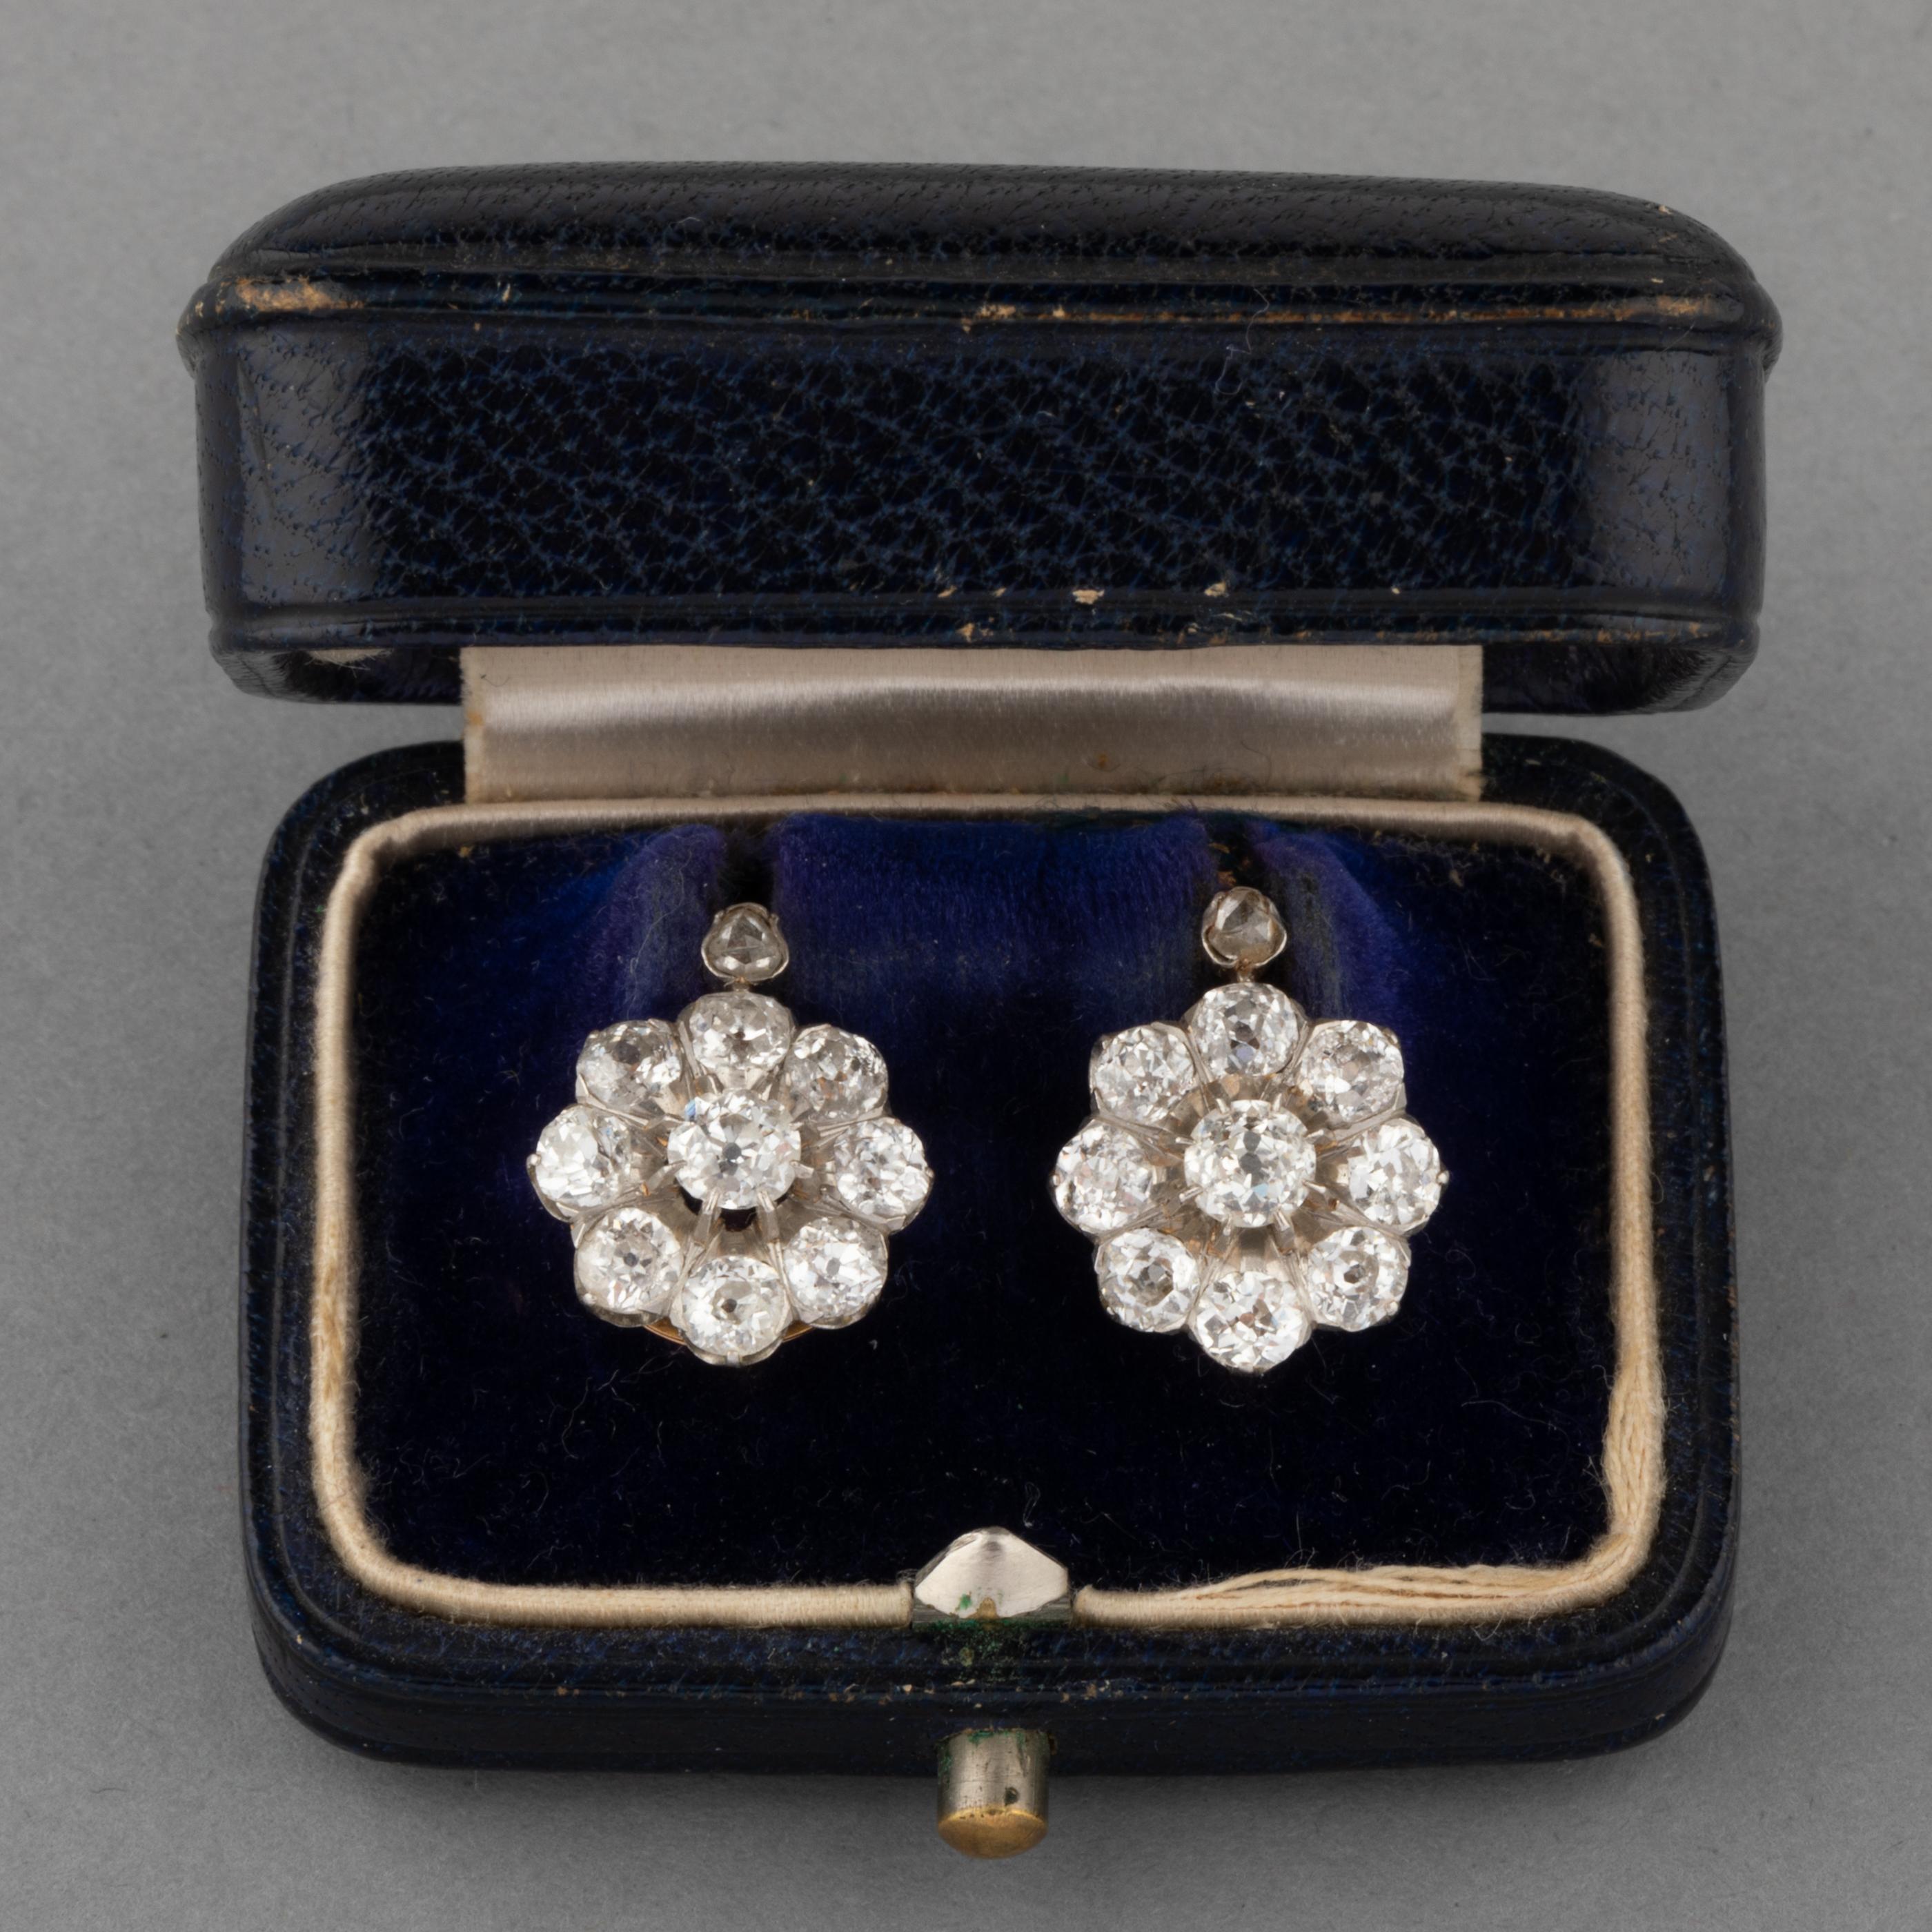 A very lovely pair of antique diamonds earrings. Made in France circa 1900.

Made in rose gold 18k(hallmarks) and set with approximately 2.50 carats of quality Old European cut diamonds. The central diamonds weights 0.20 carats approximately and the